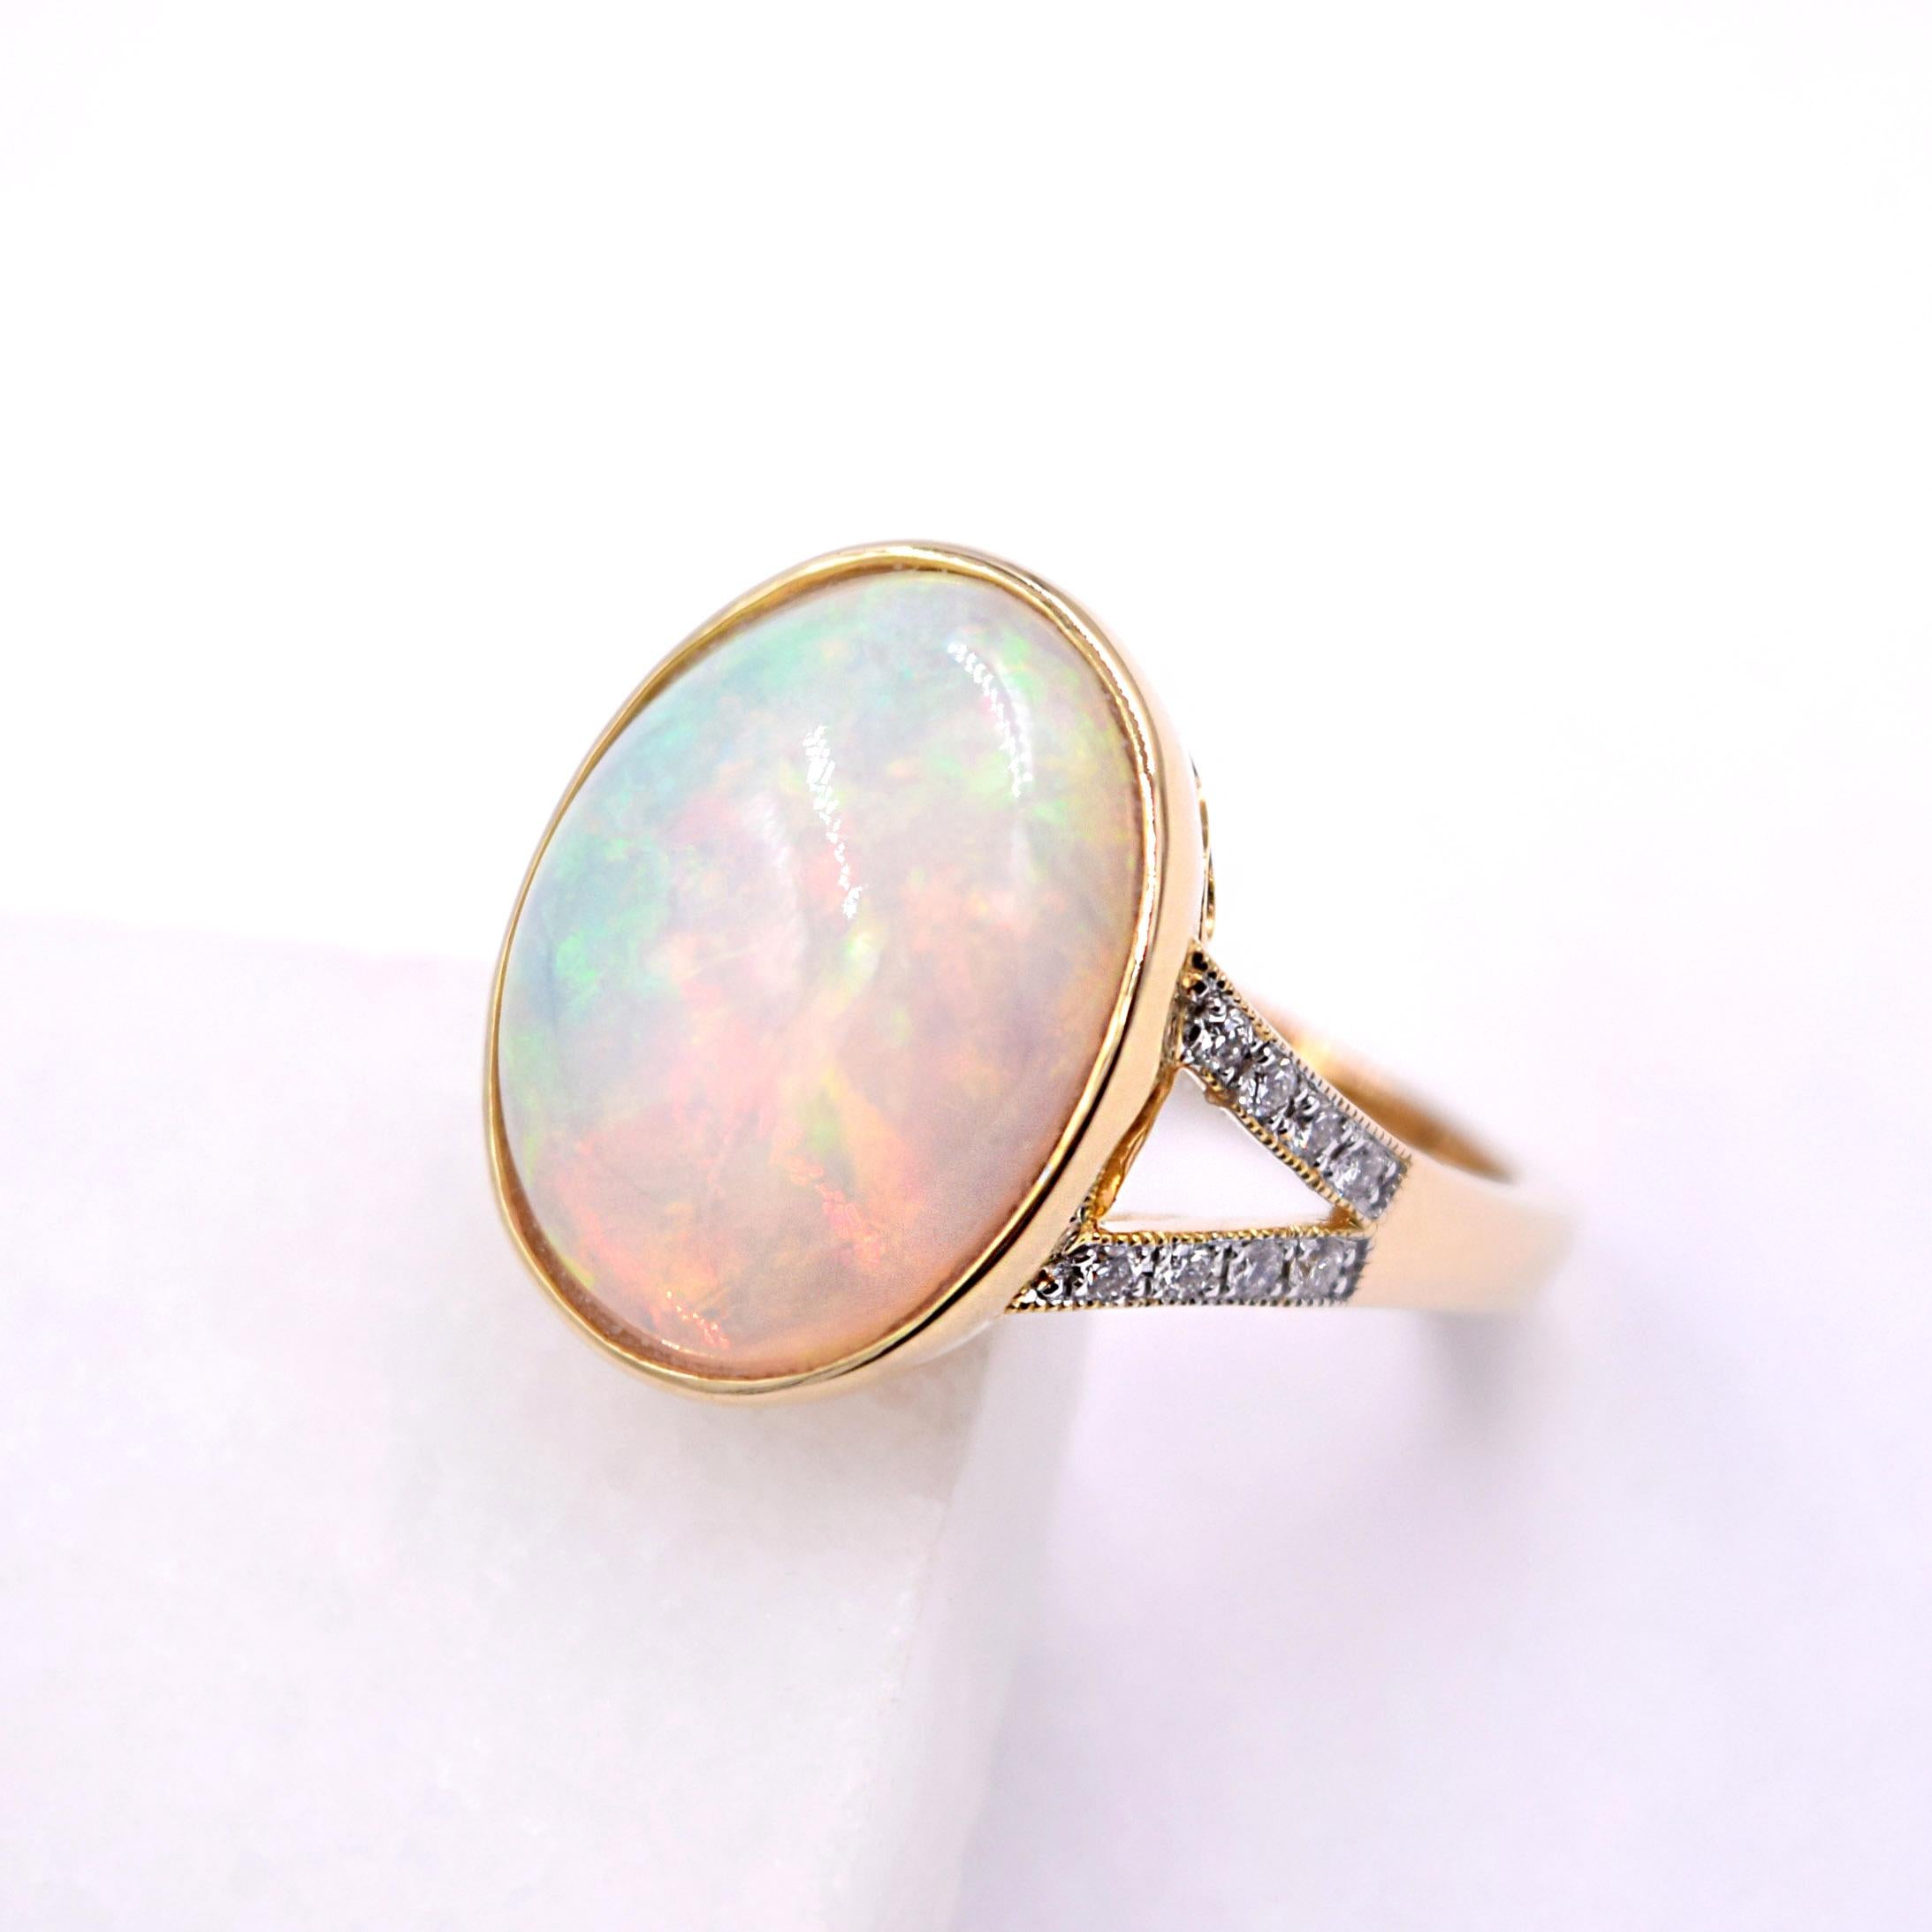 Oval Cut 8.09 Carat Ethiopian Opal and White Diamond Statement Ring in 14 Karat Gold For Sale